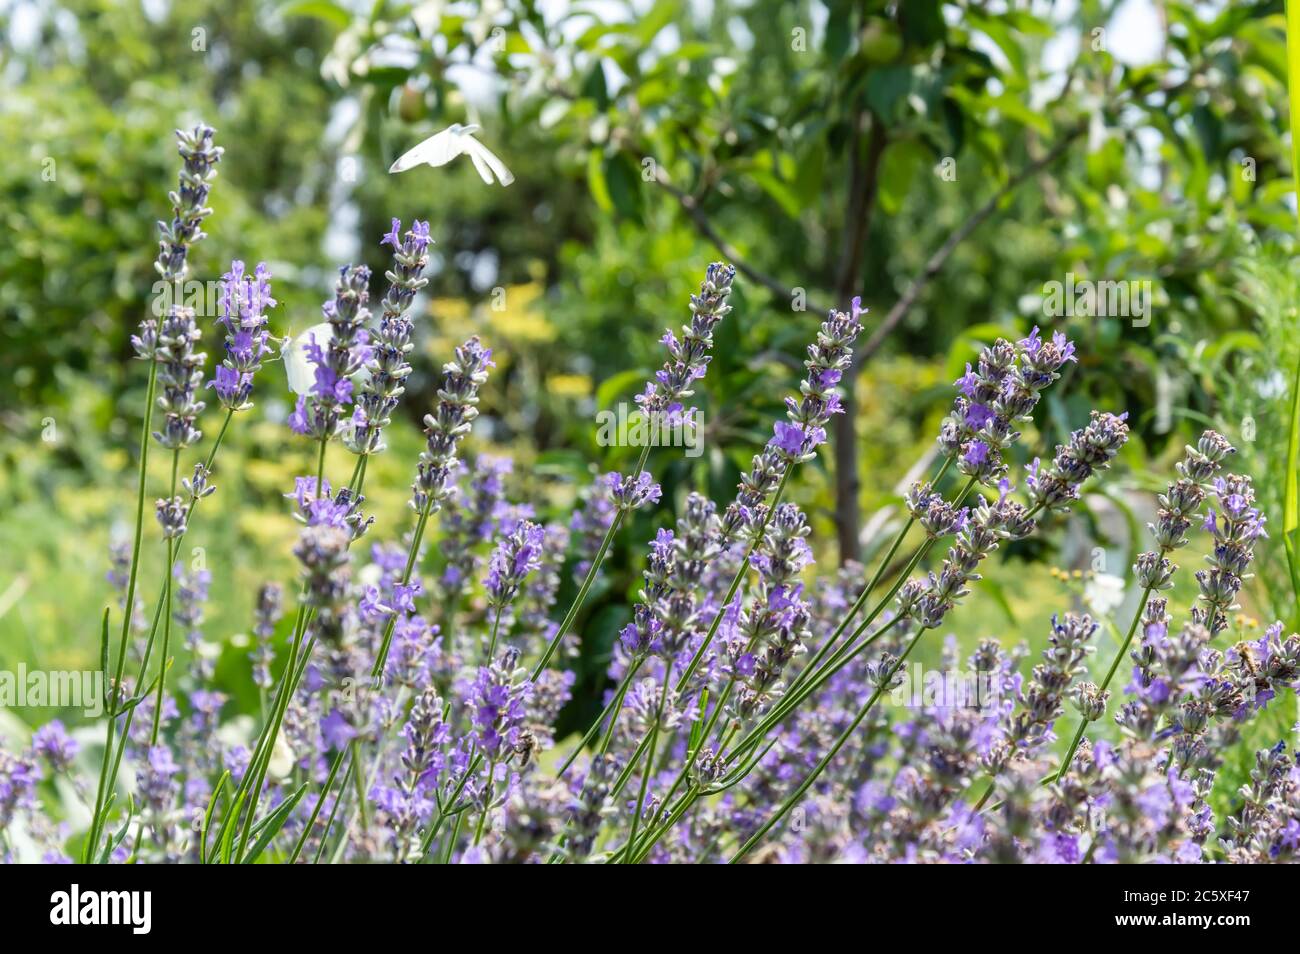 Purple lavender flowers in garden on sunny summer day. Fragrant flowers with blurred green grass in the background Stock Photo